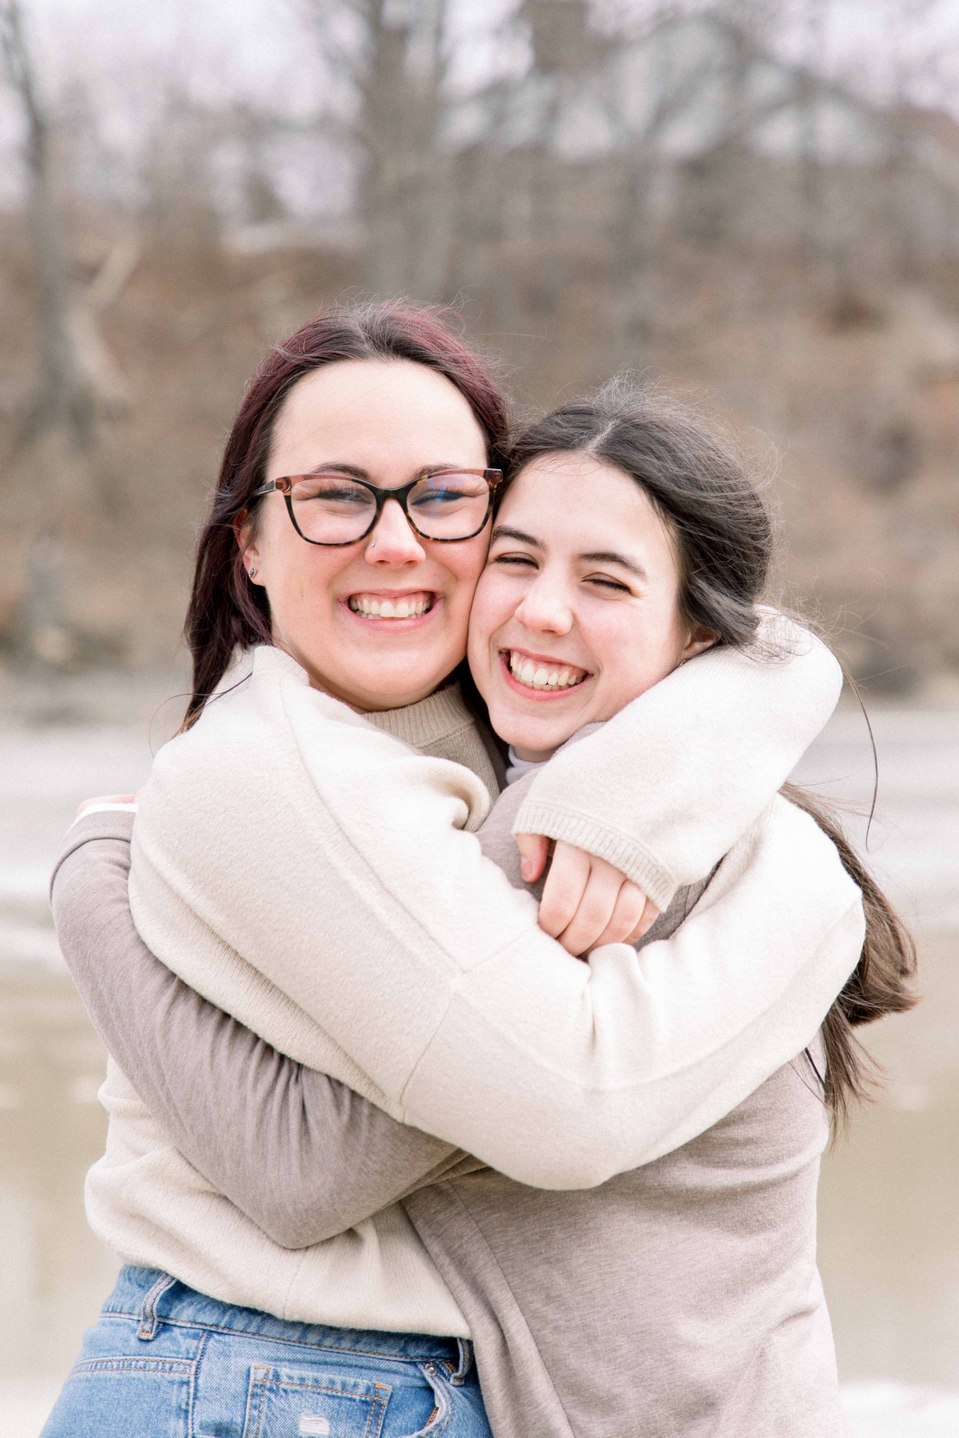 Portrait of two sisters hugging each other and smiling while looking at the camera, Niagara family photographer, family photography, Niagara portrait photographer, portrait photography, Emily VanderBeek Photography.